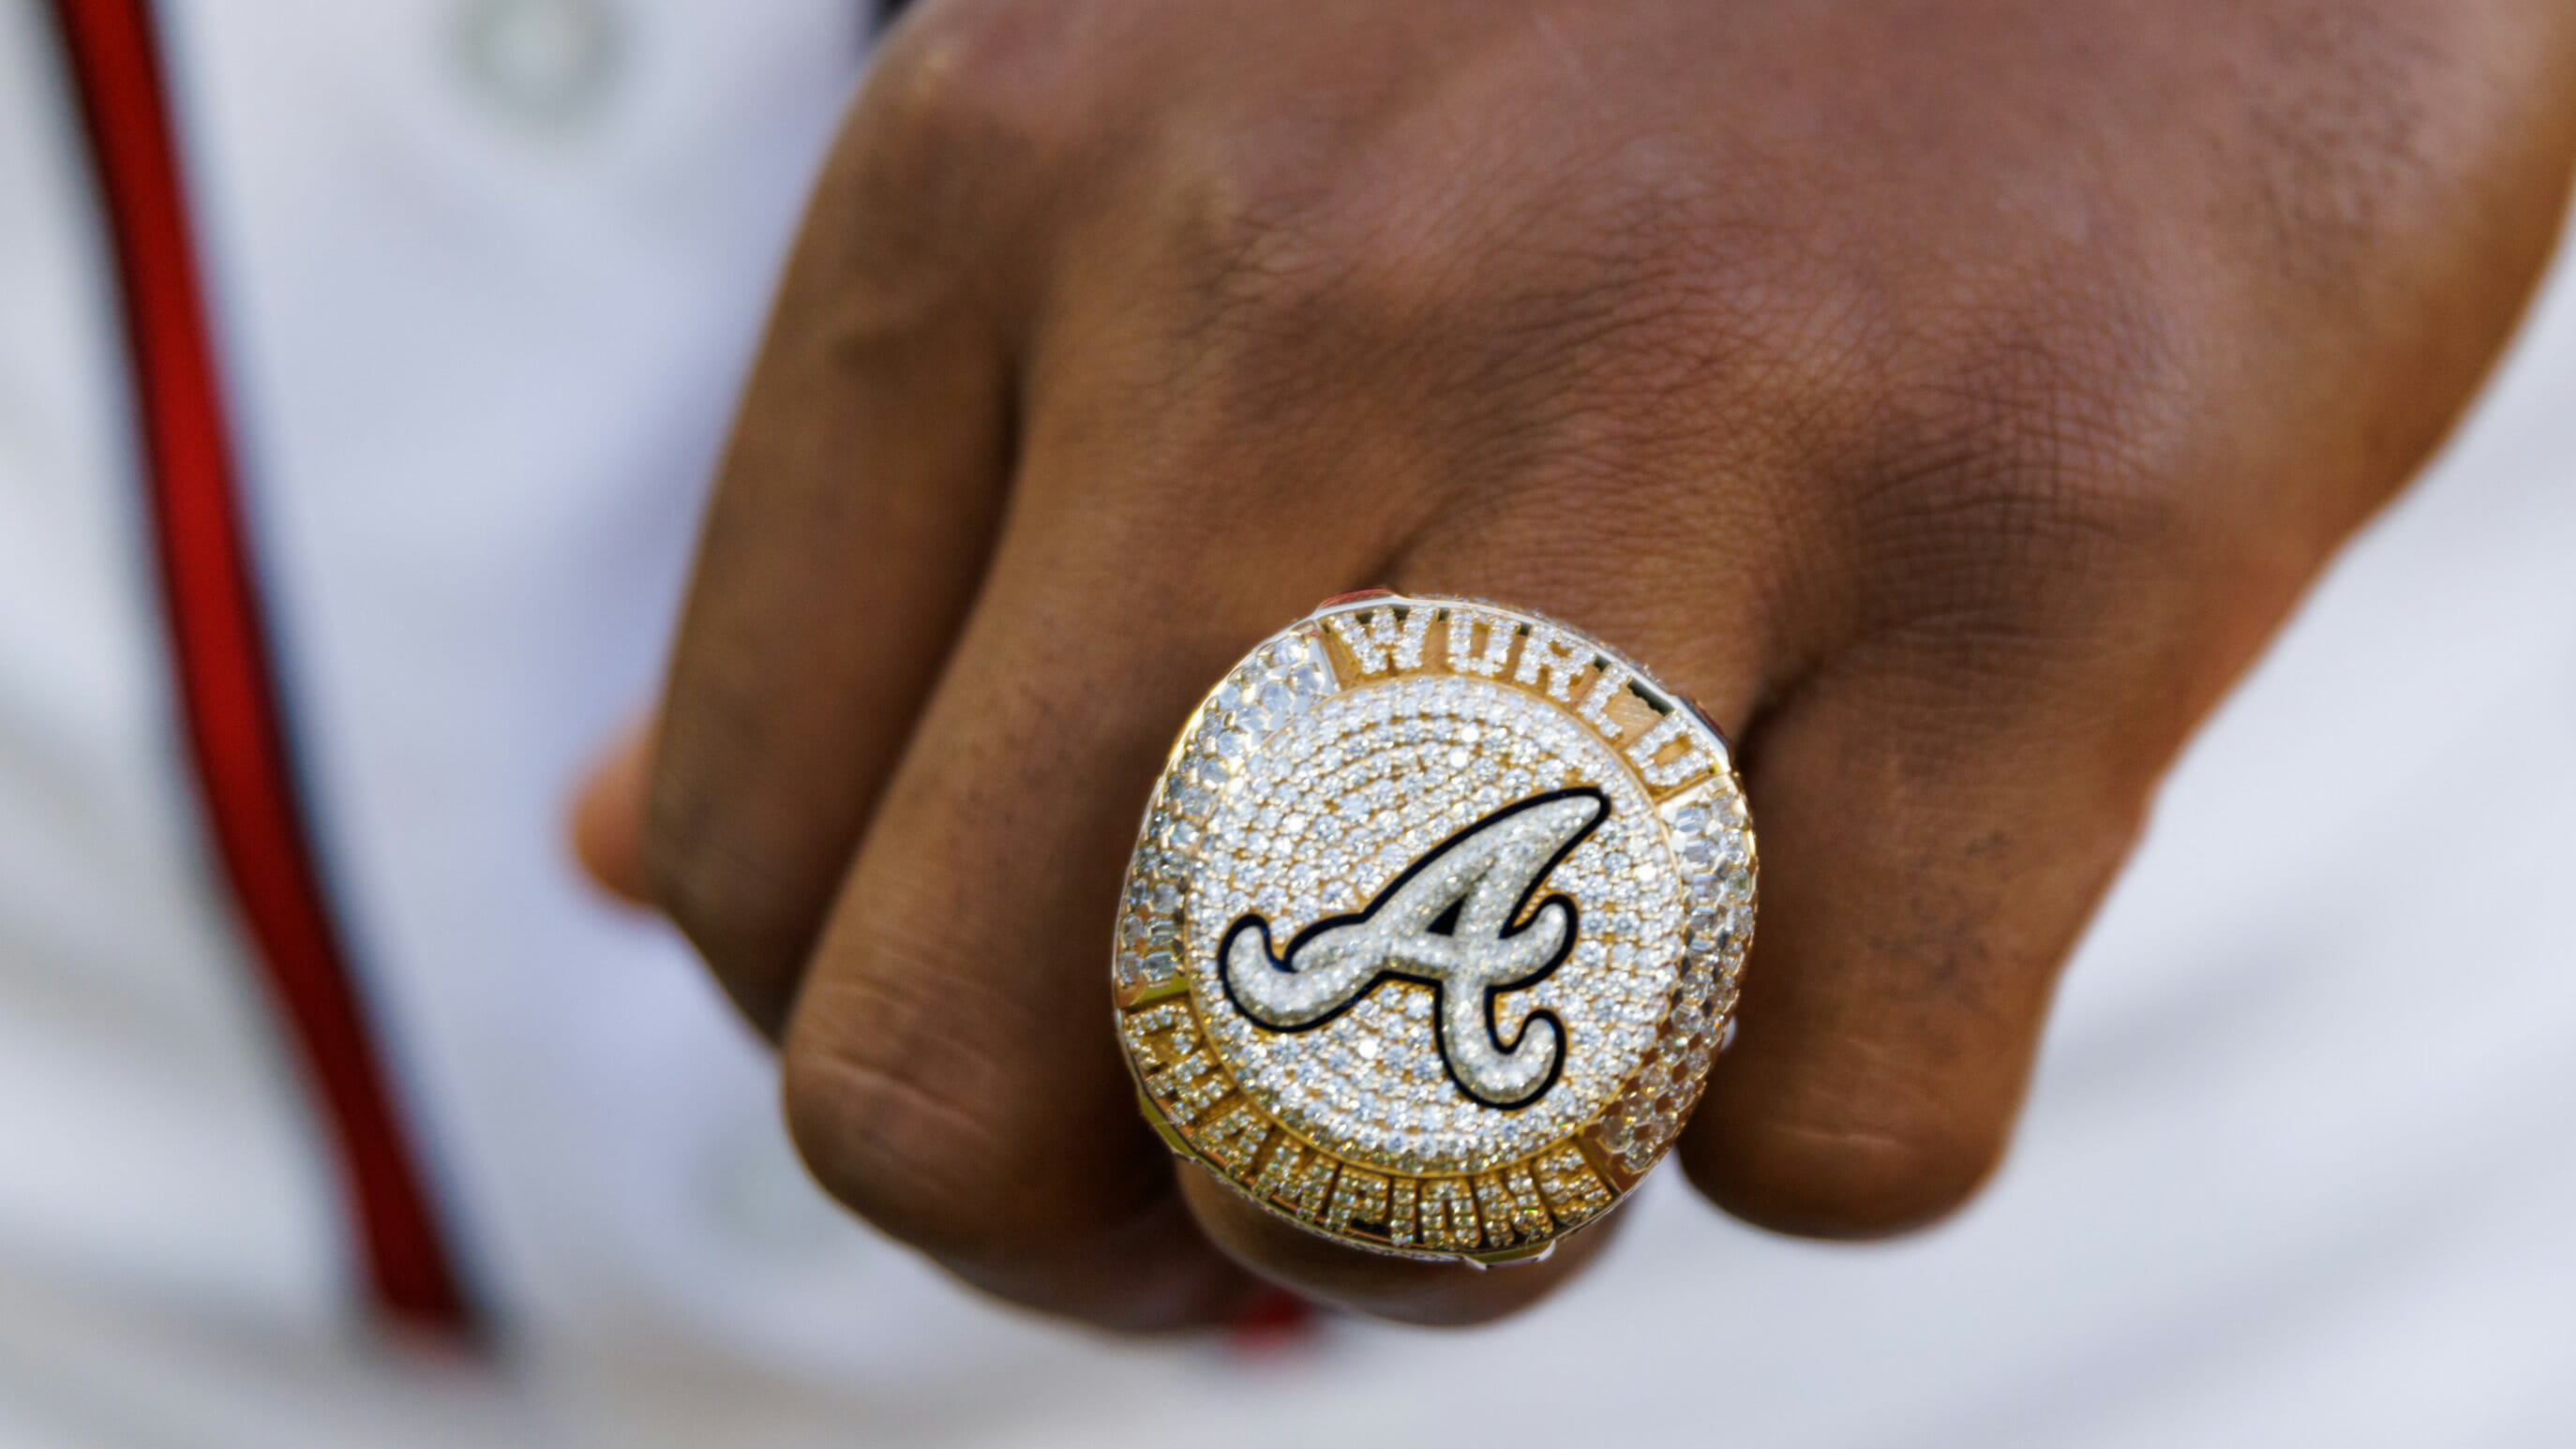 MLB, Candy Digital will offer World Series ring with Dodgers NFT